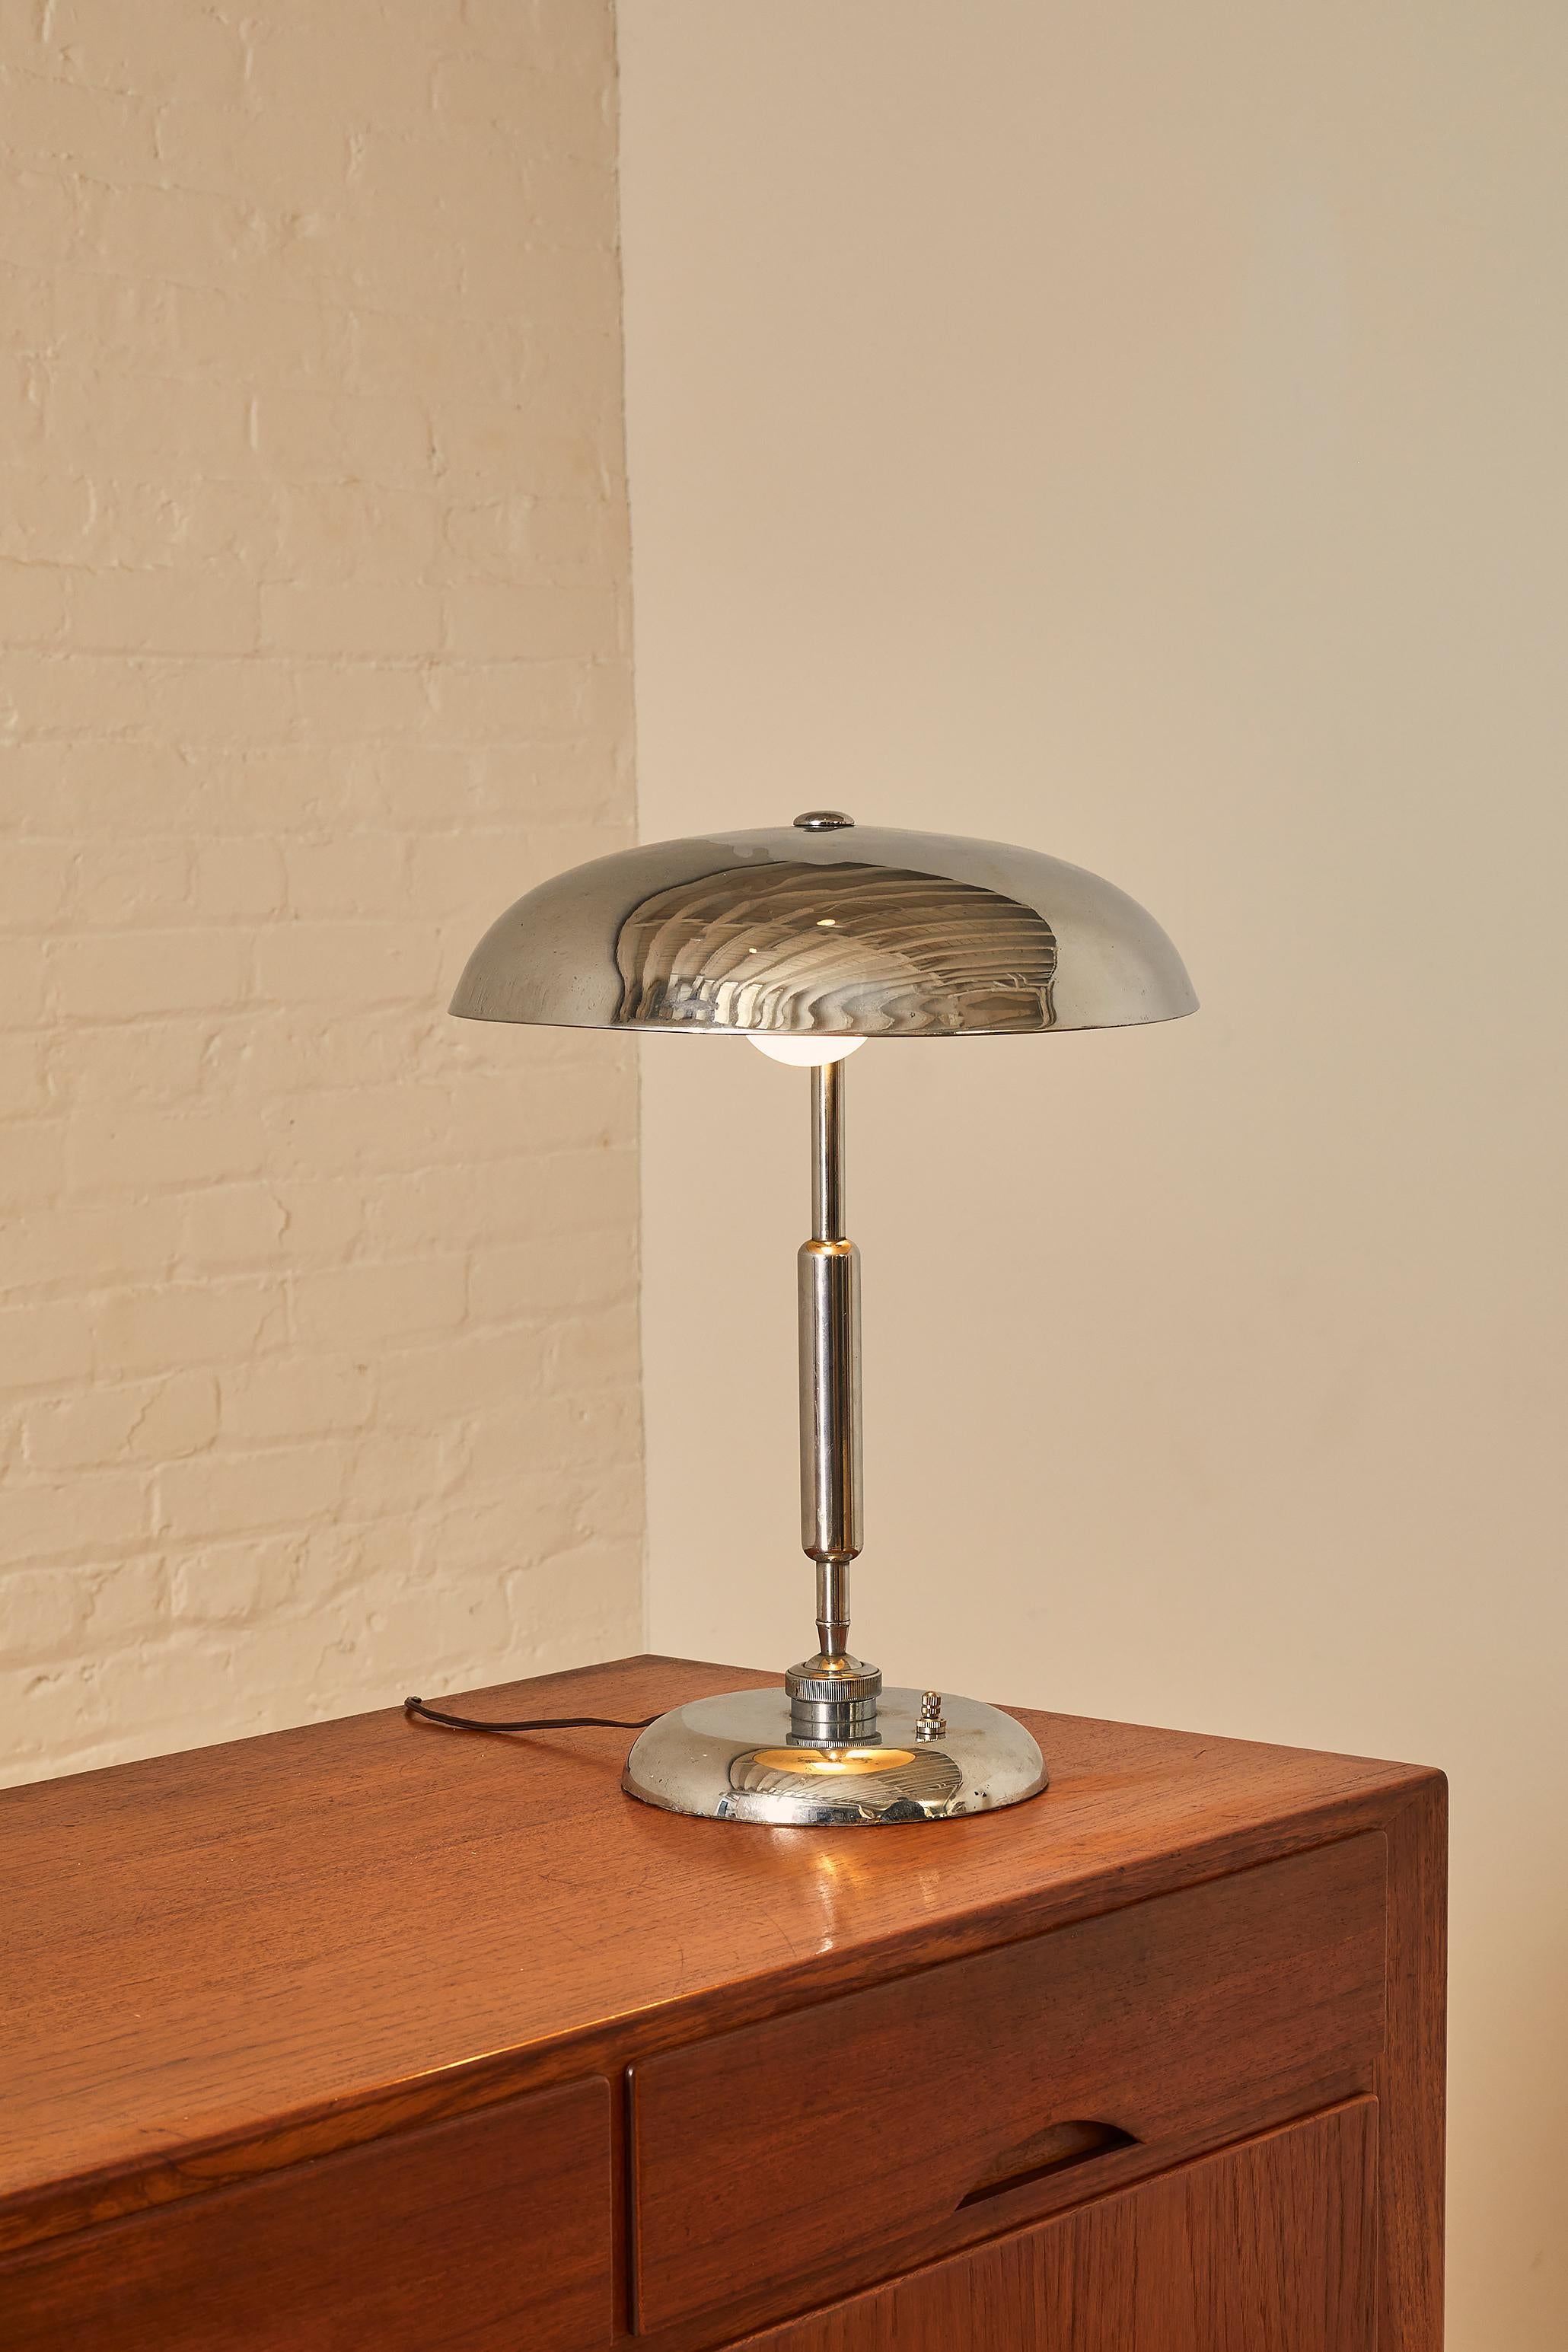 Ministerial Lamp designed by the Italian architect Giovanni Michelucci and made of chromed metal in 1940 by 